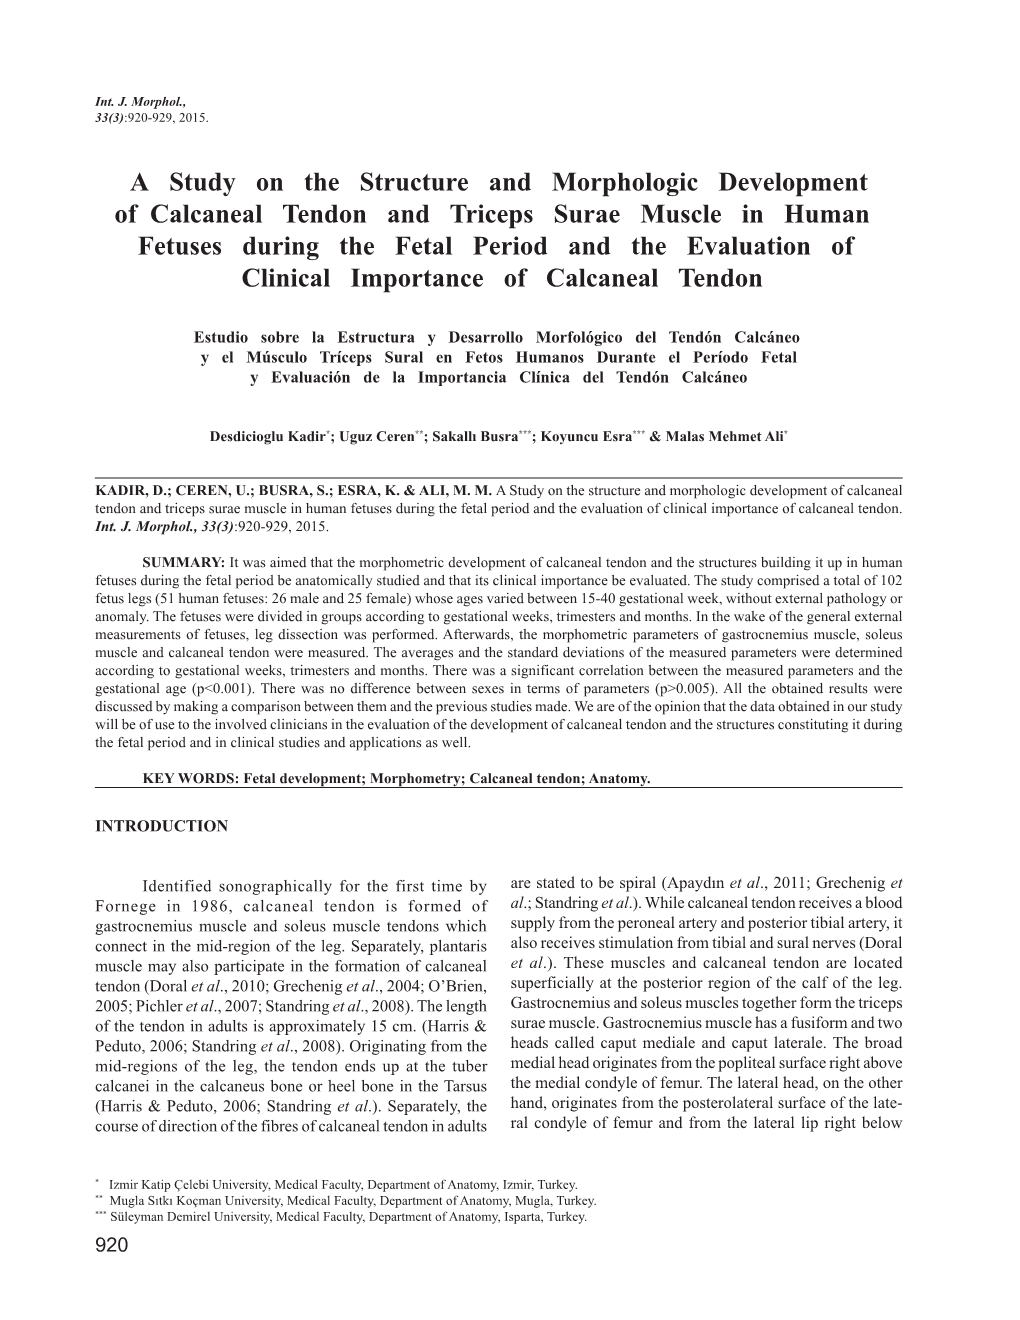 A Study on the Structure and Morphologic Development Of